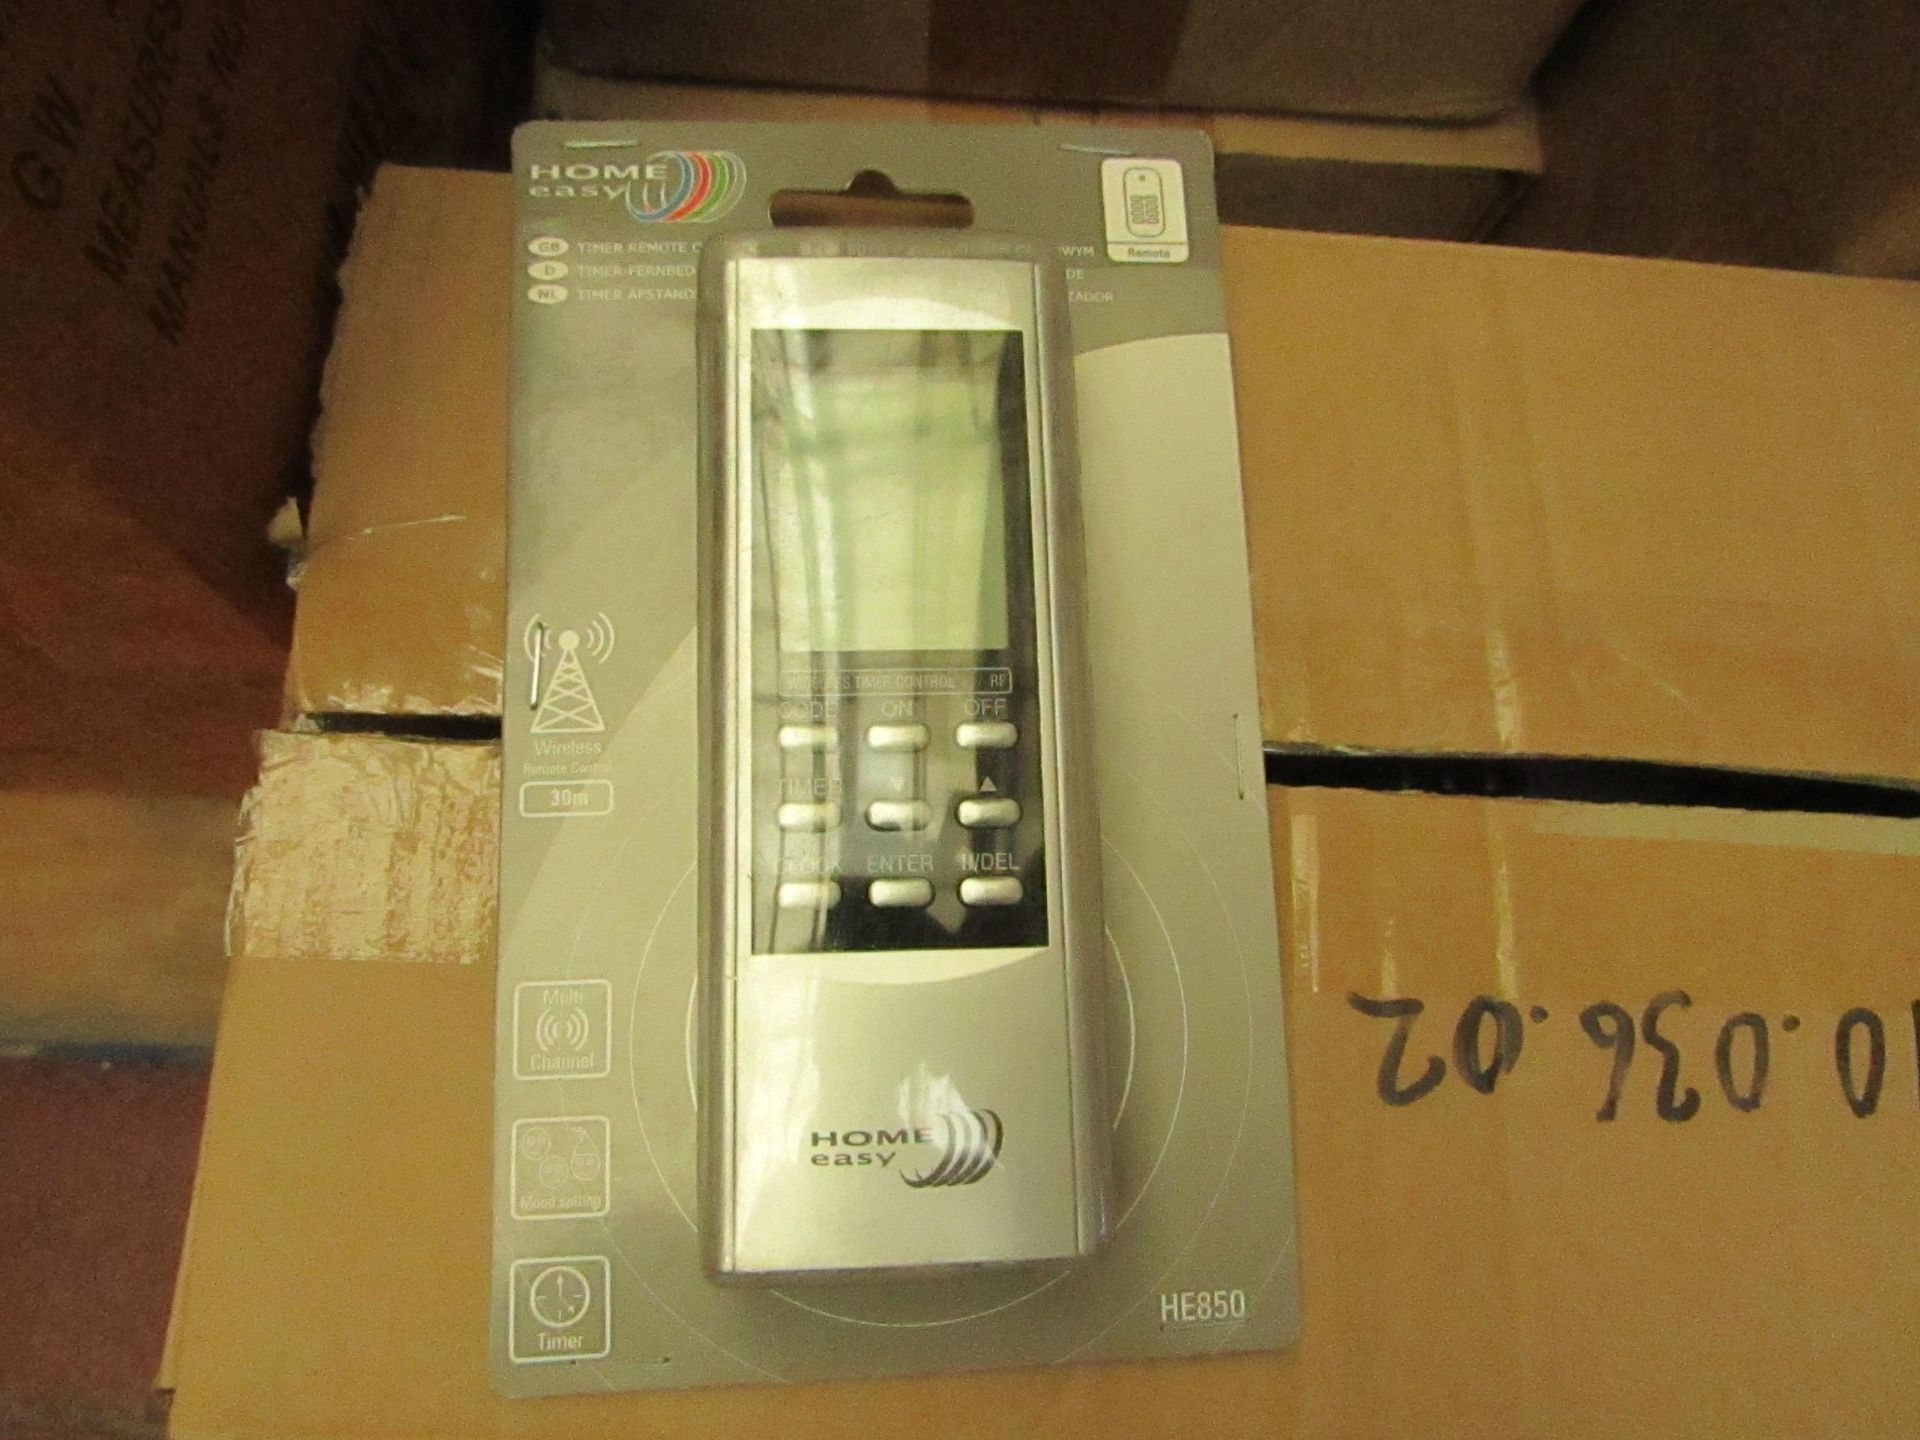 2x Home easy timer remote control, new in packaging.